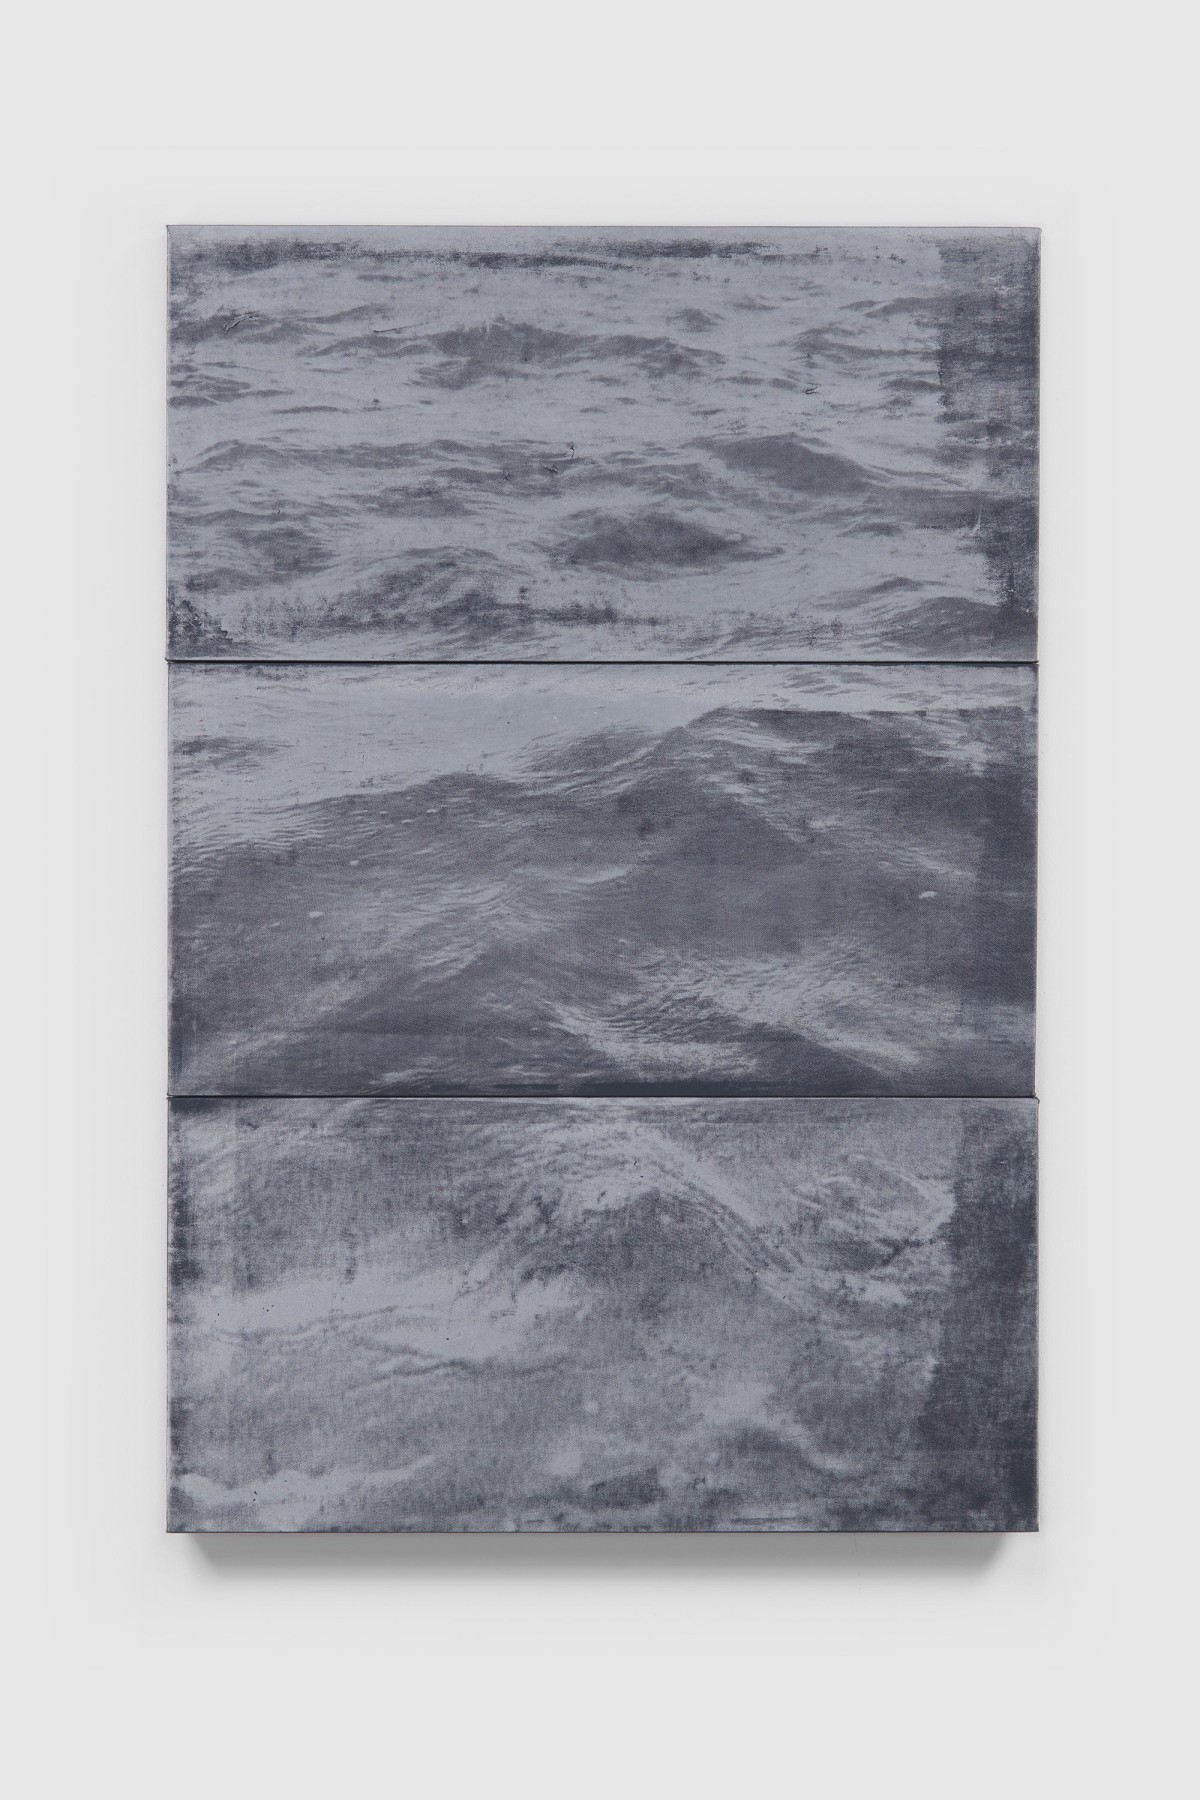 Three depictions of ocean in black and white tones